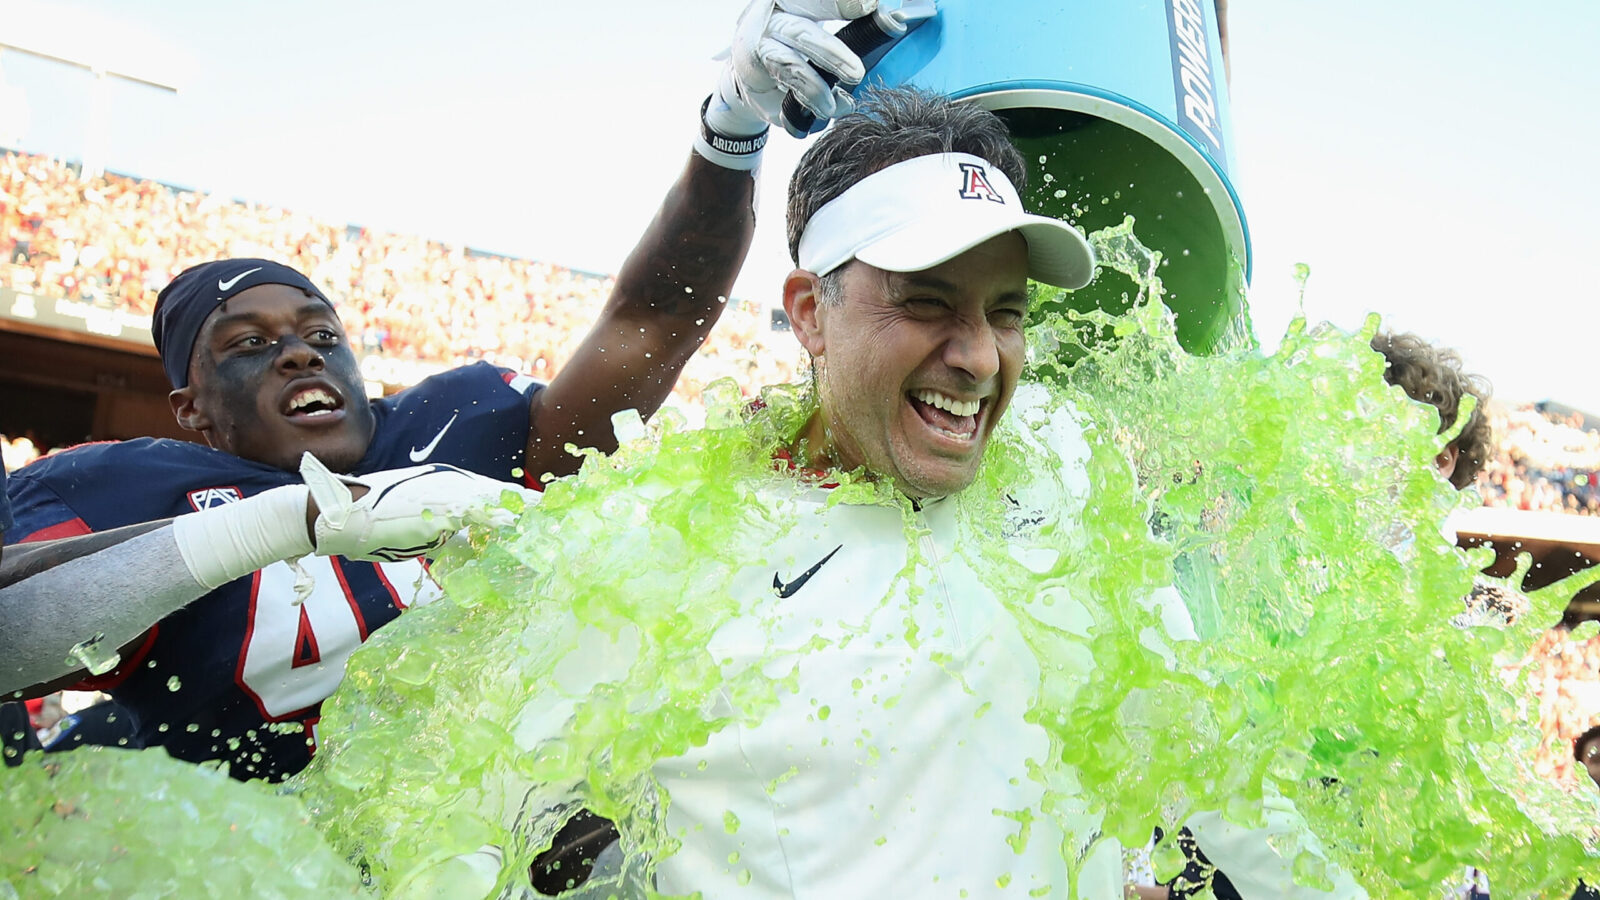 Head coach Jedd Fisch of the Arizona Wildcats is dunked with Powerade after defeating the Arizona S...